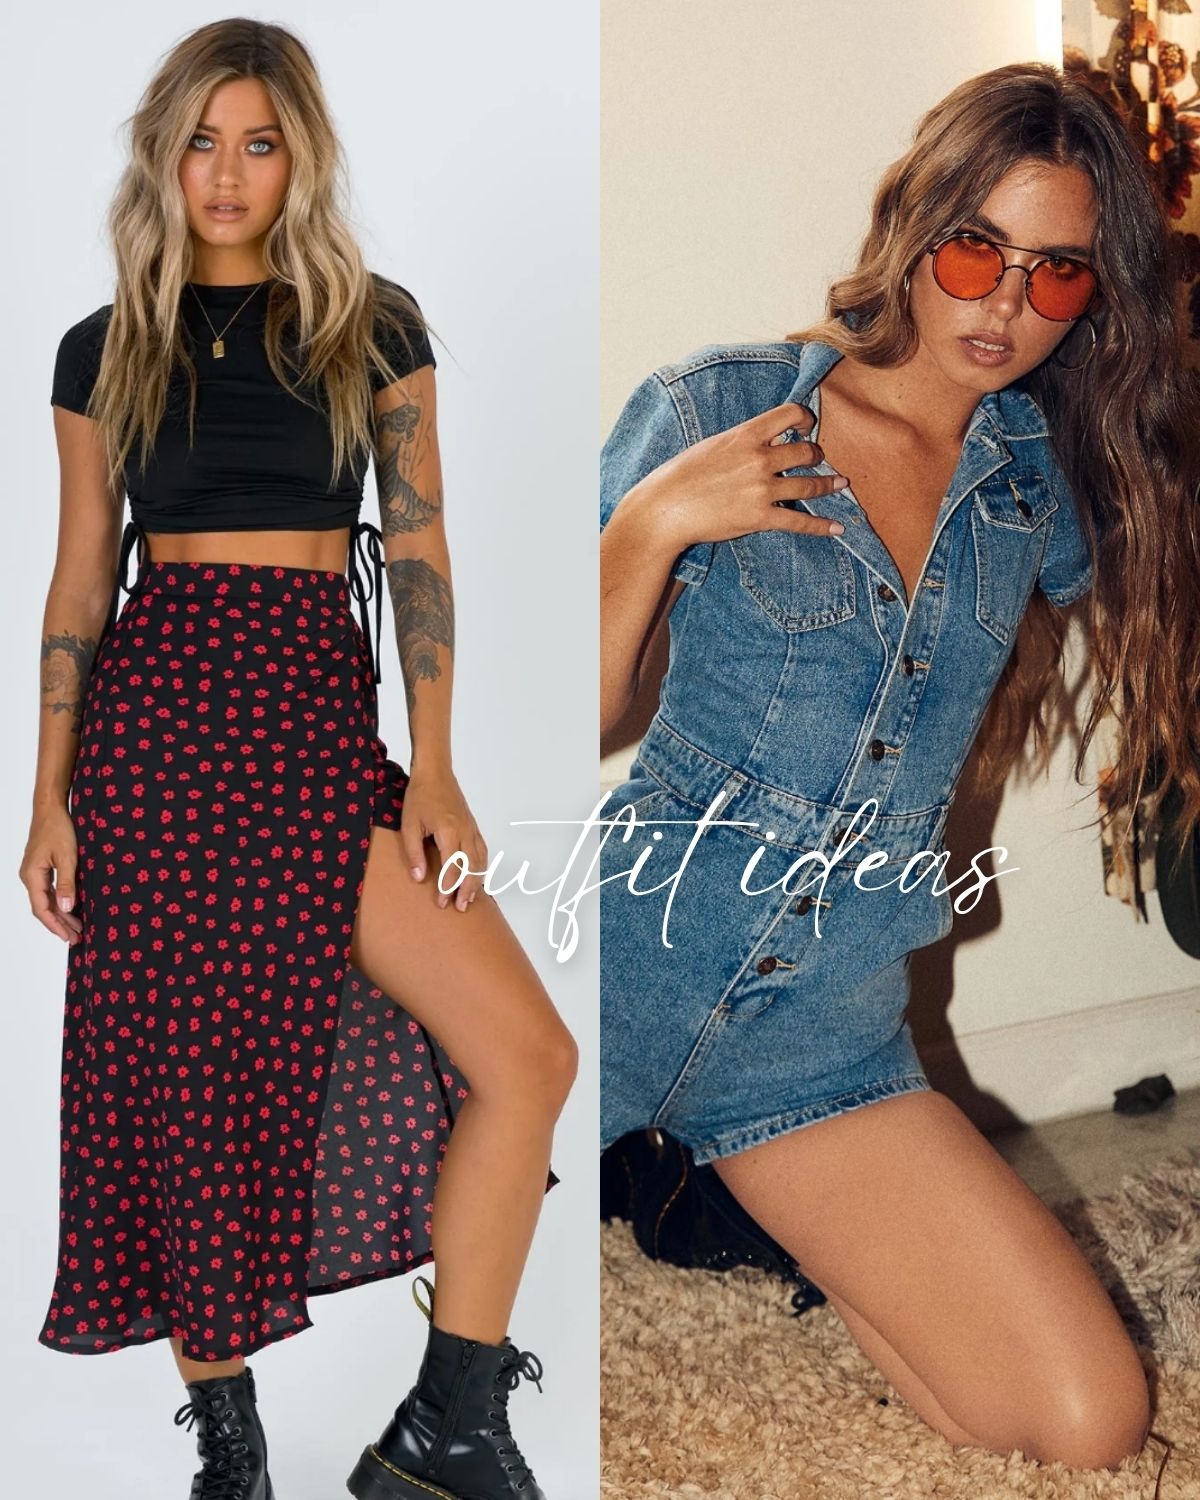 Two cool grunge outfits for concerts 